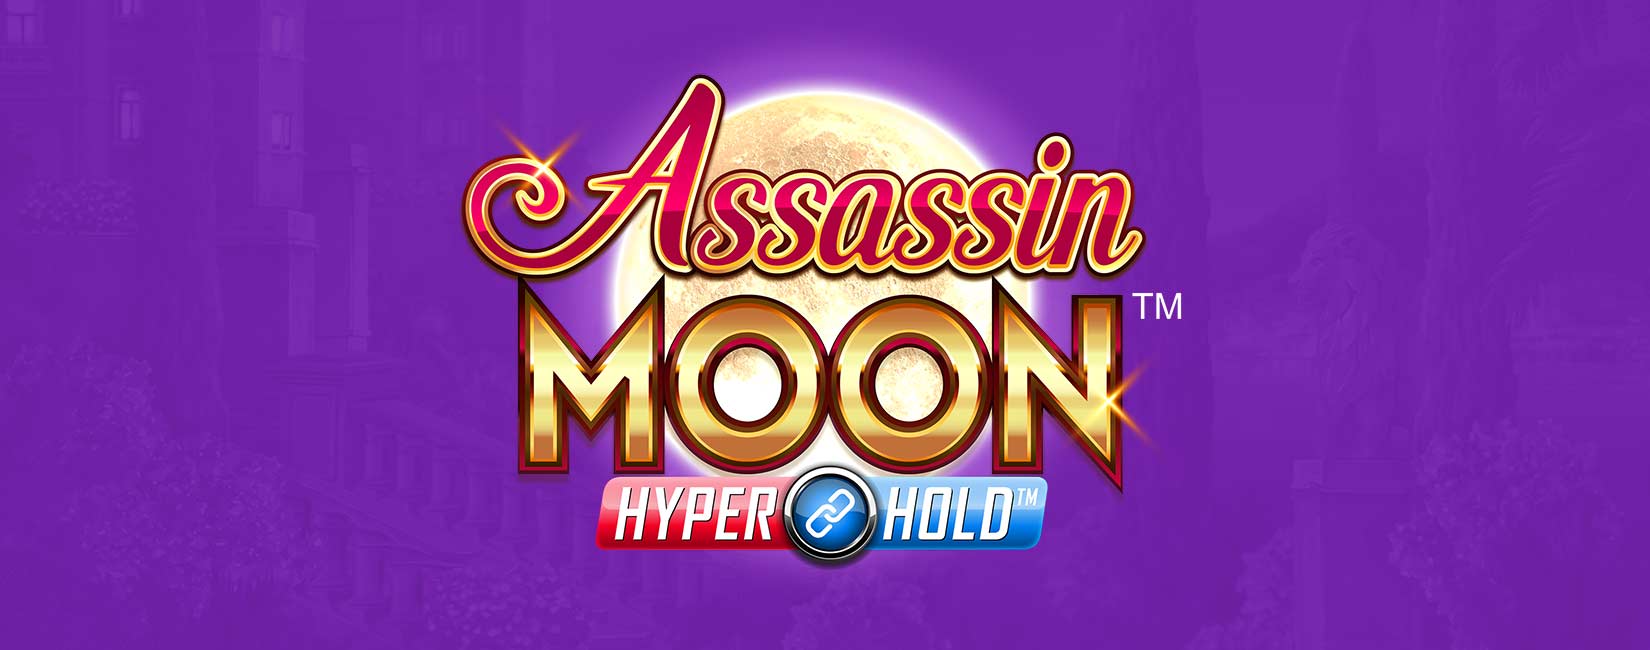 CRE-287830-GC-January Reviews Digital Design Assassin Moon Slot-Page Banner-1650x650